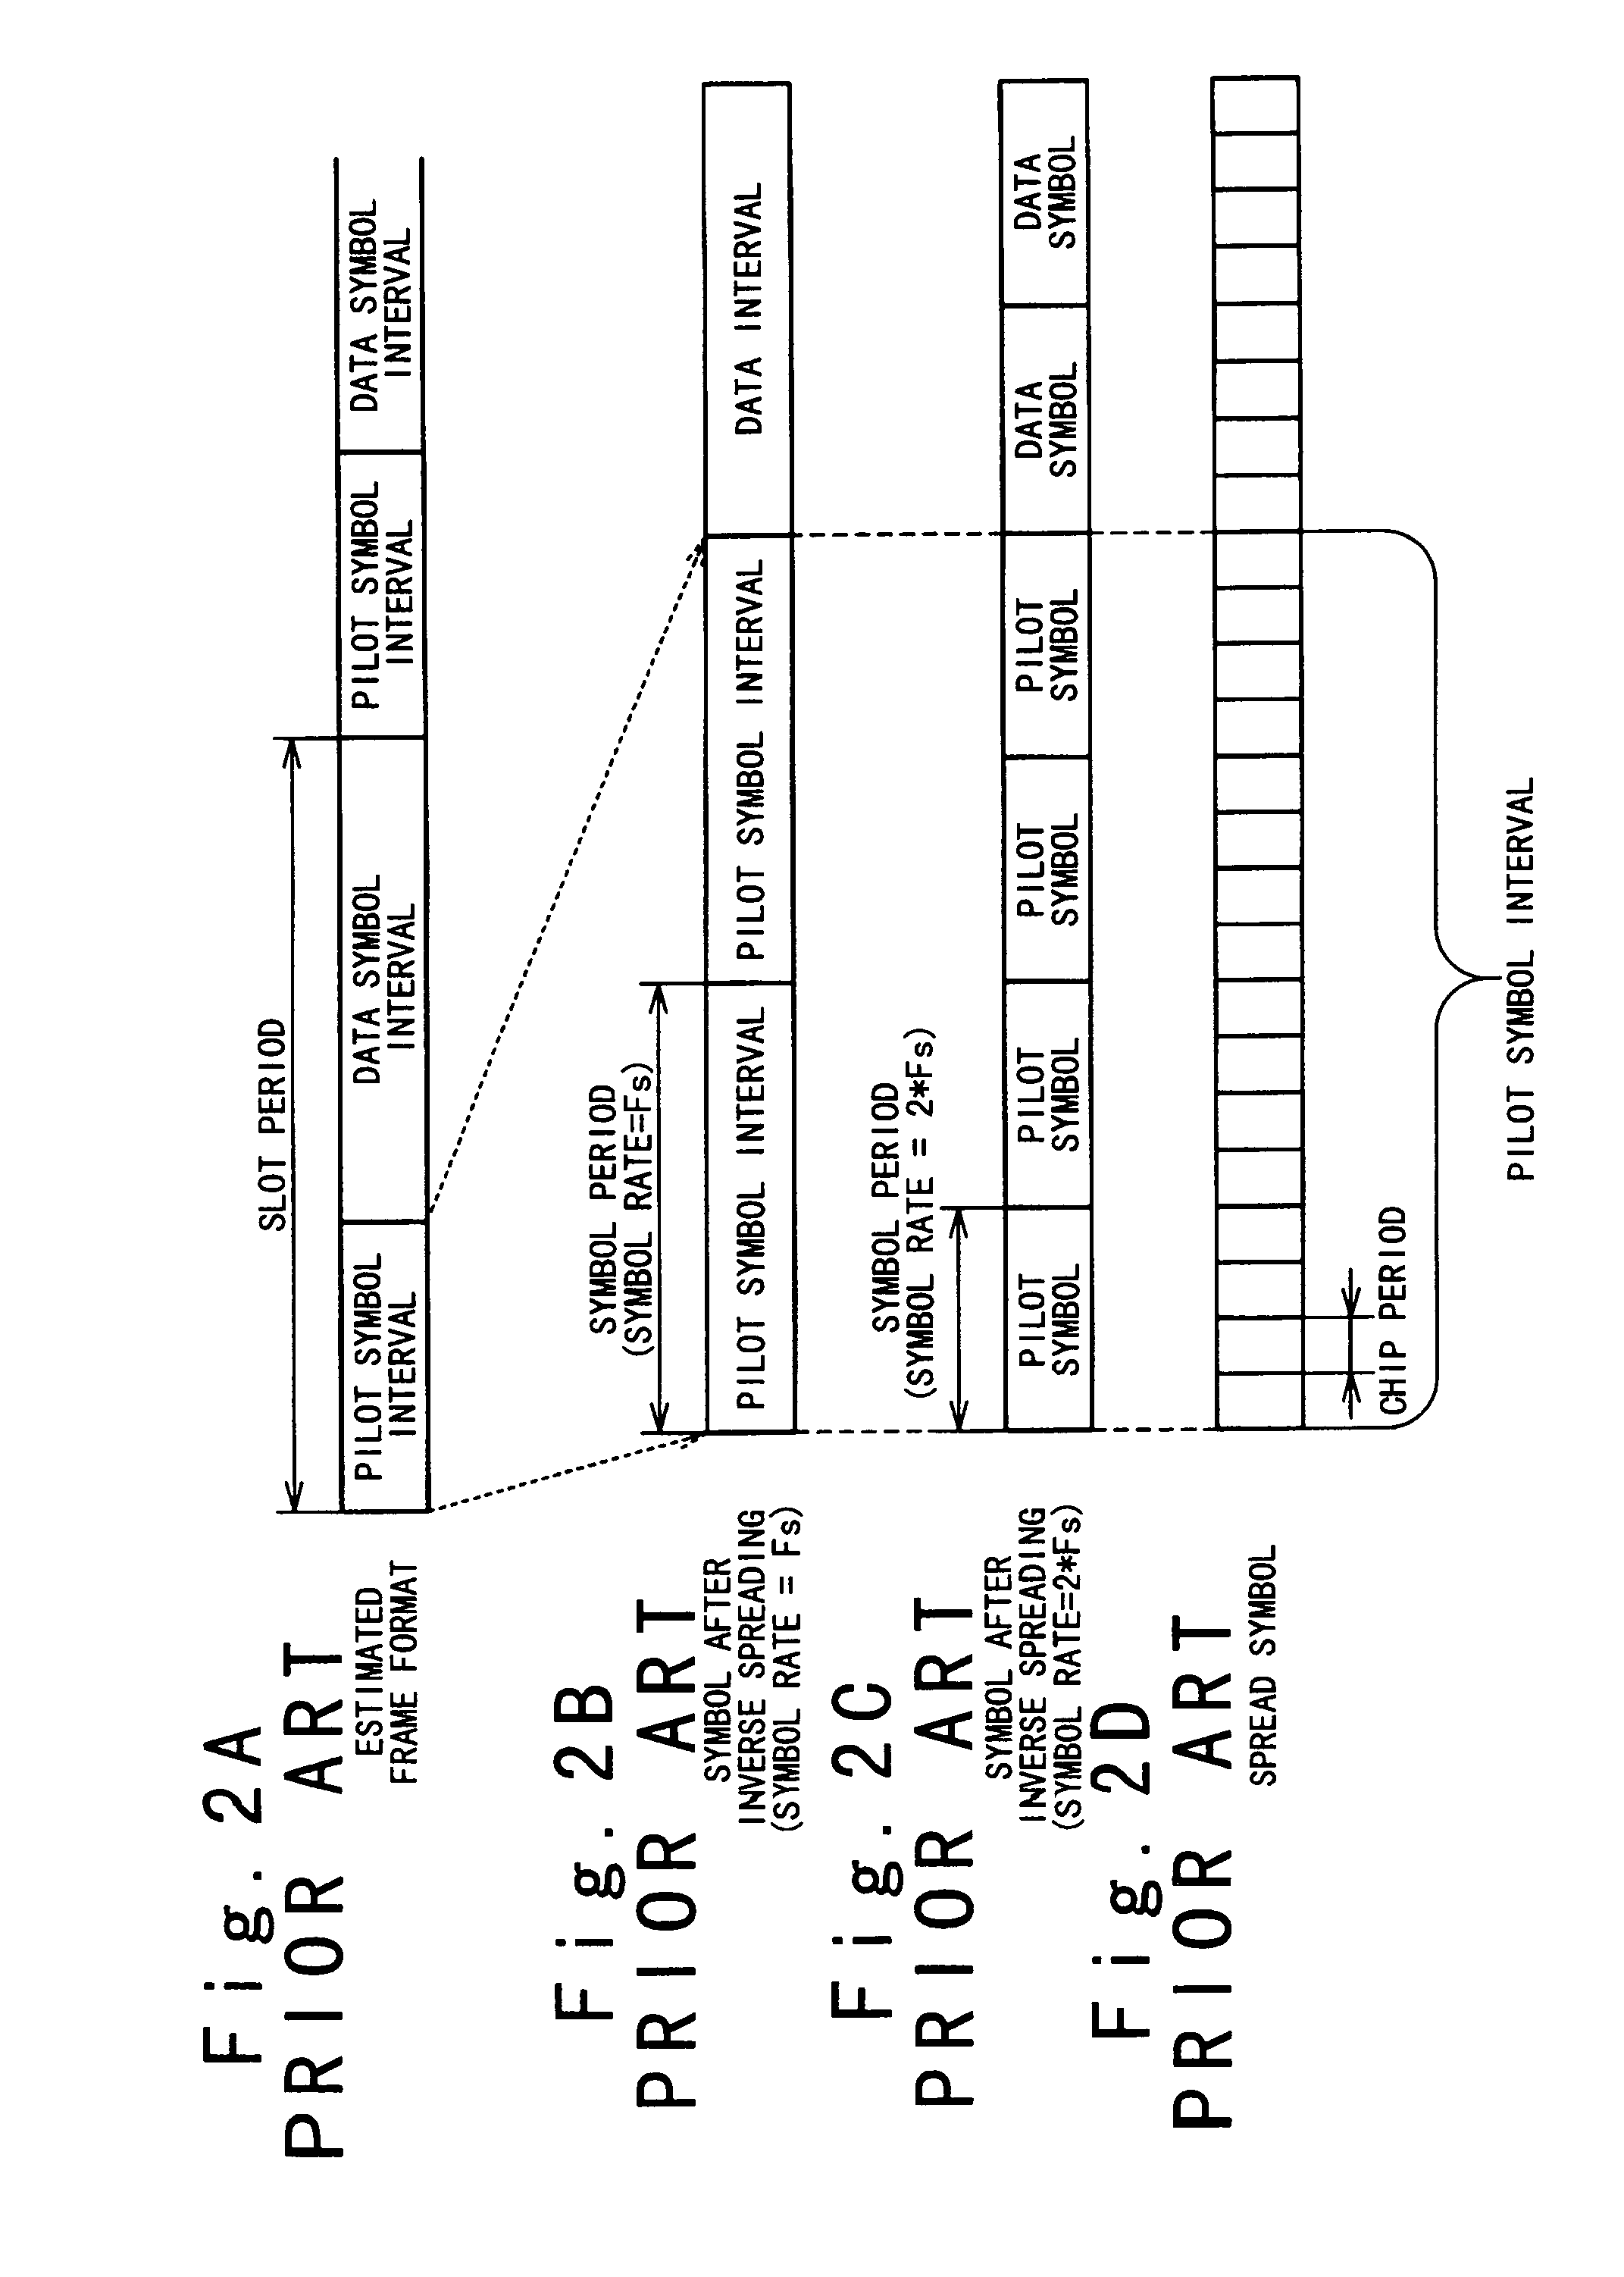 CDMA receiver capable of estimation of frequency offset in high precision